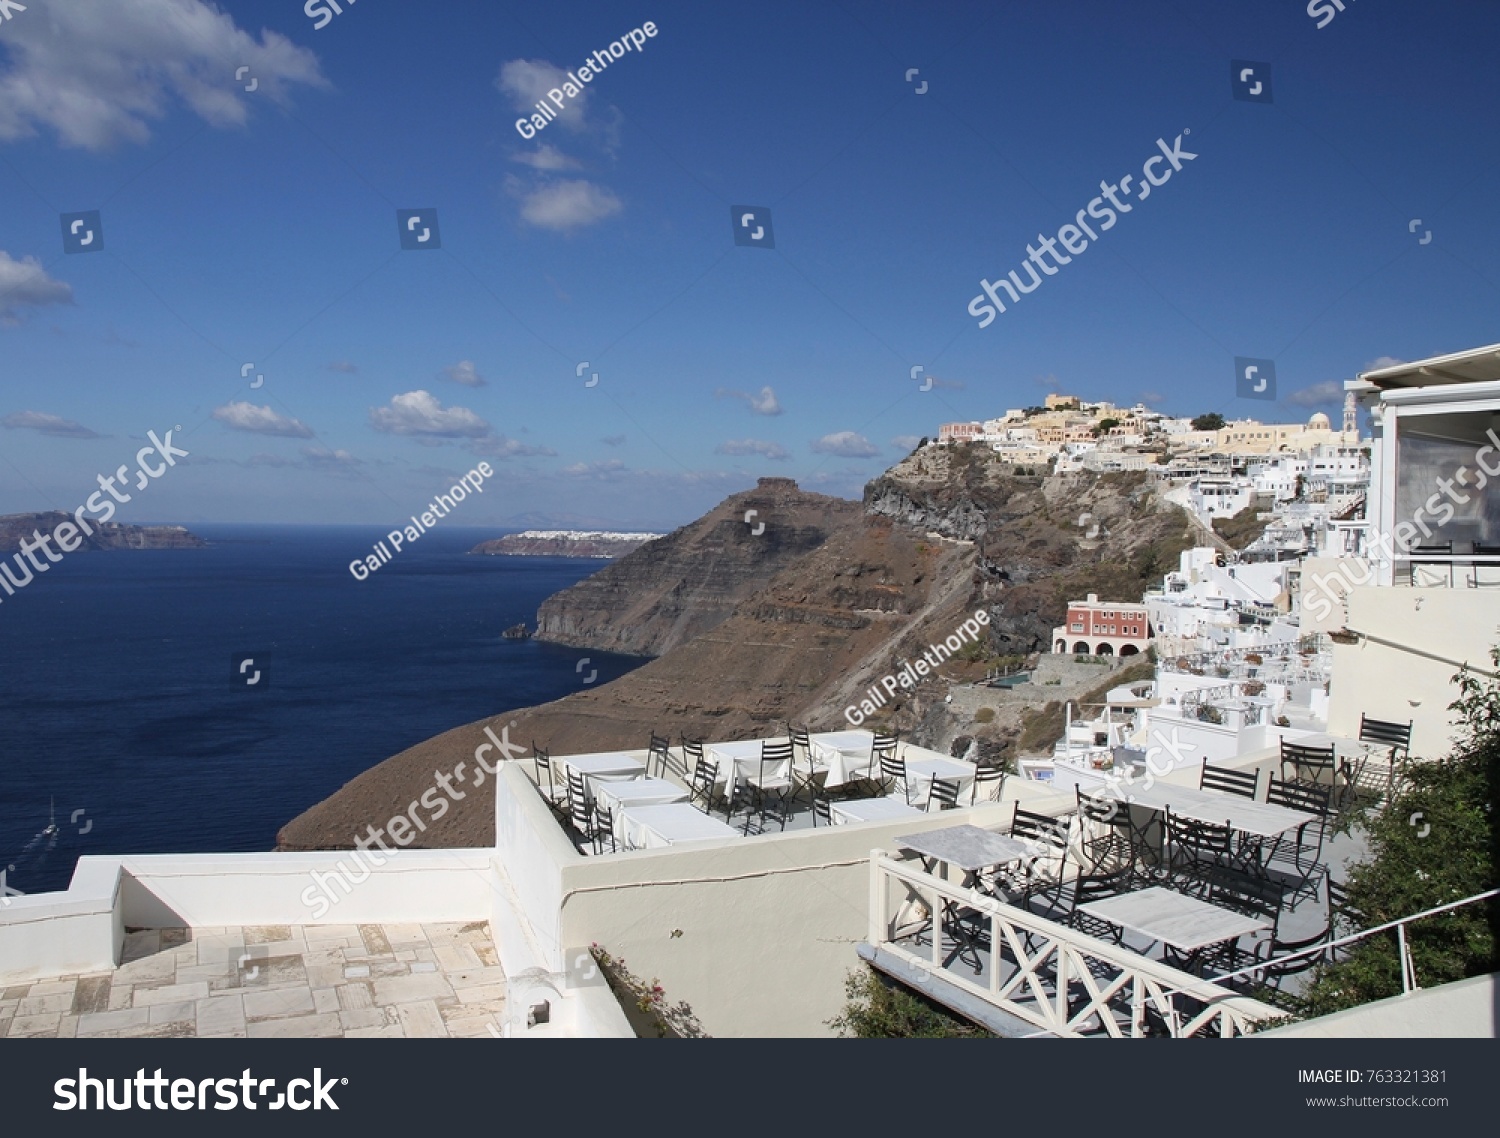 Panormaic view of the city of Fira with its cubiform buildings on Santorini Island, Greece. #763321381